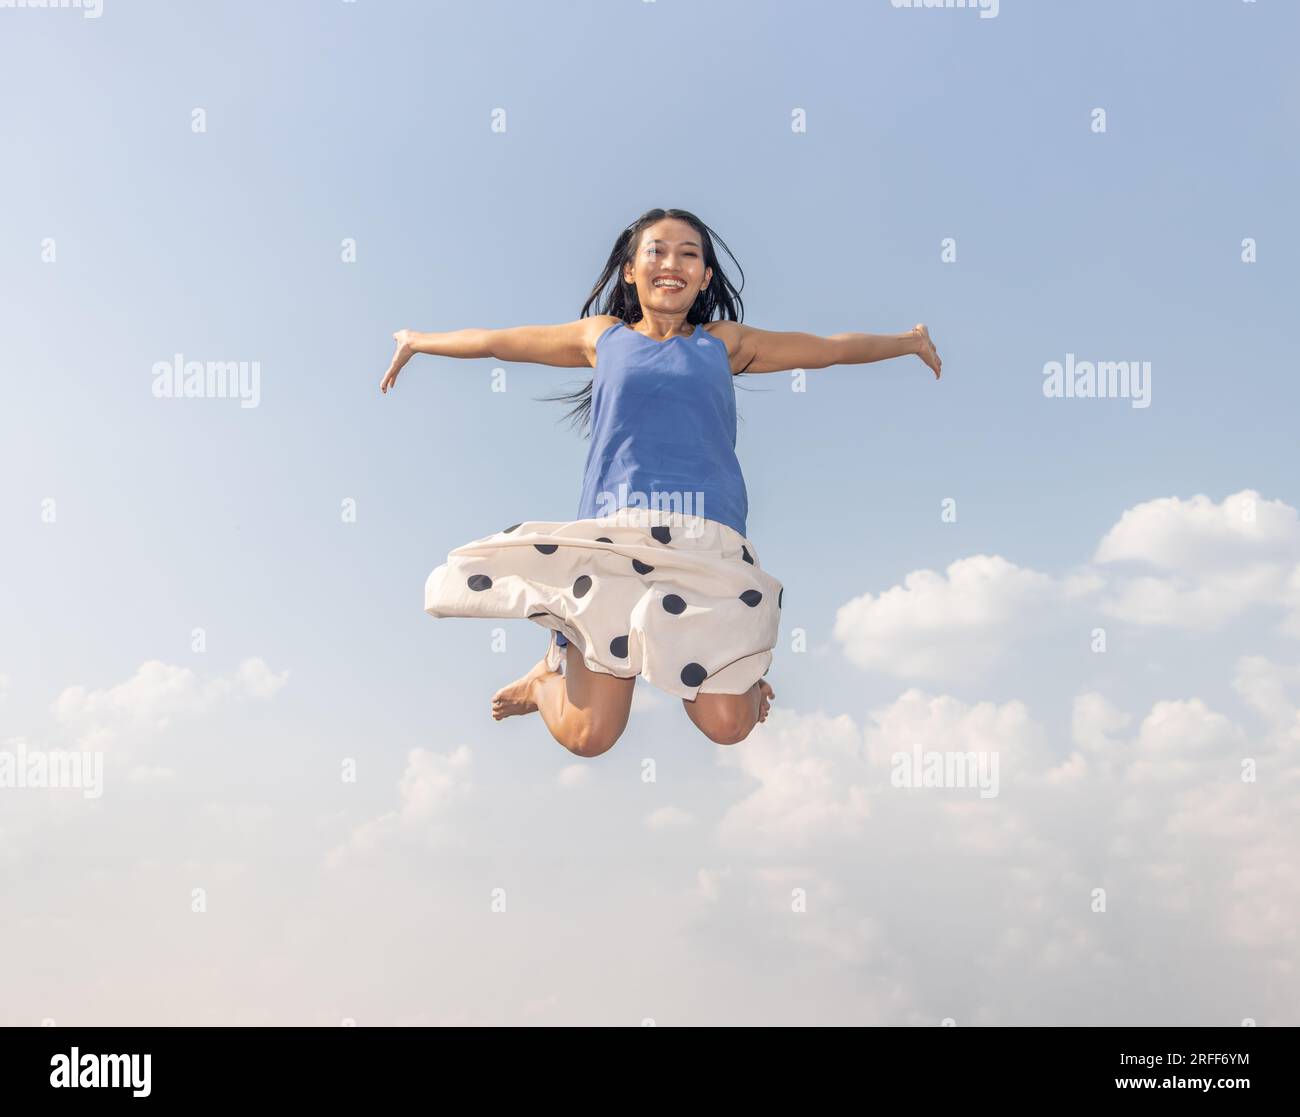 Cheerful woman jumps high on the background of the blue sky Stock Photo